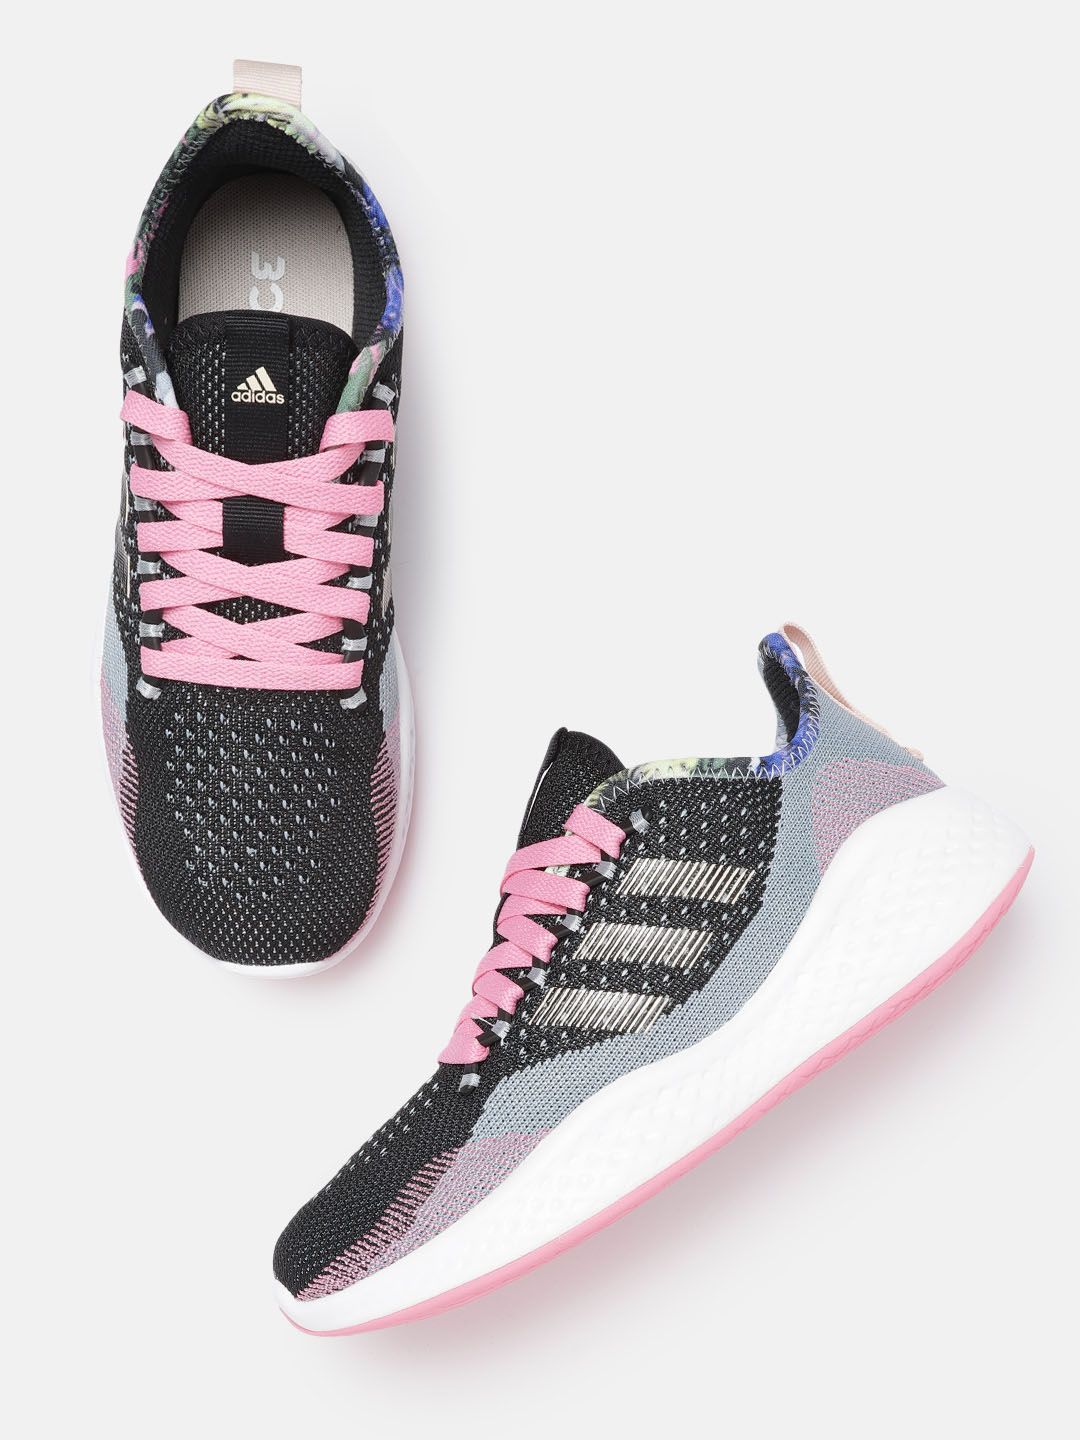 ADIDAS Women Black & Pink Woven Design FluidFlow 2.0 Running Shoes Price in India